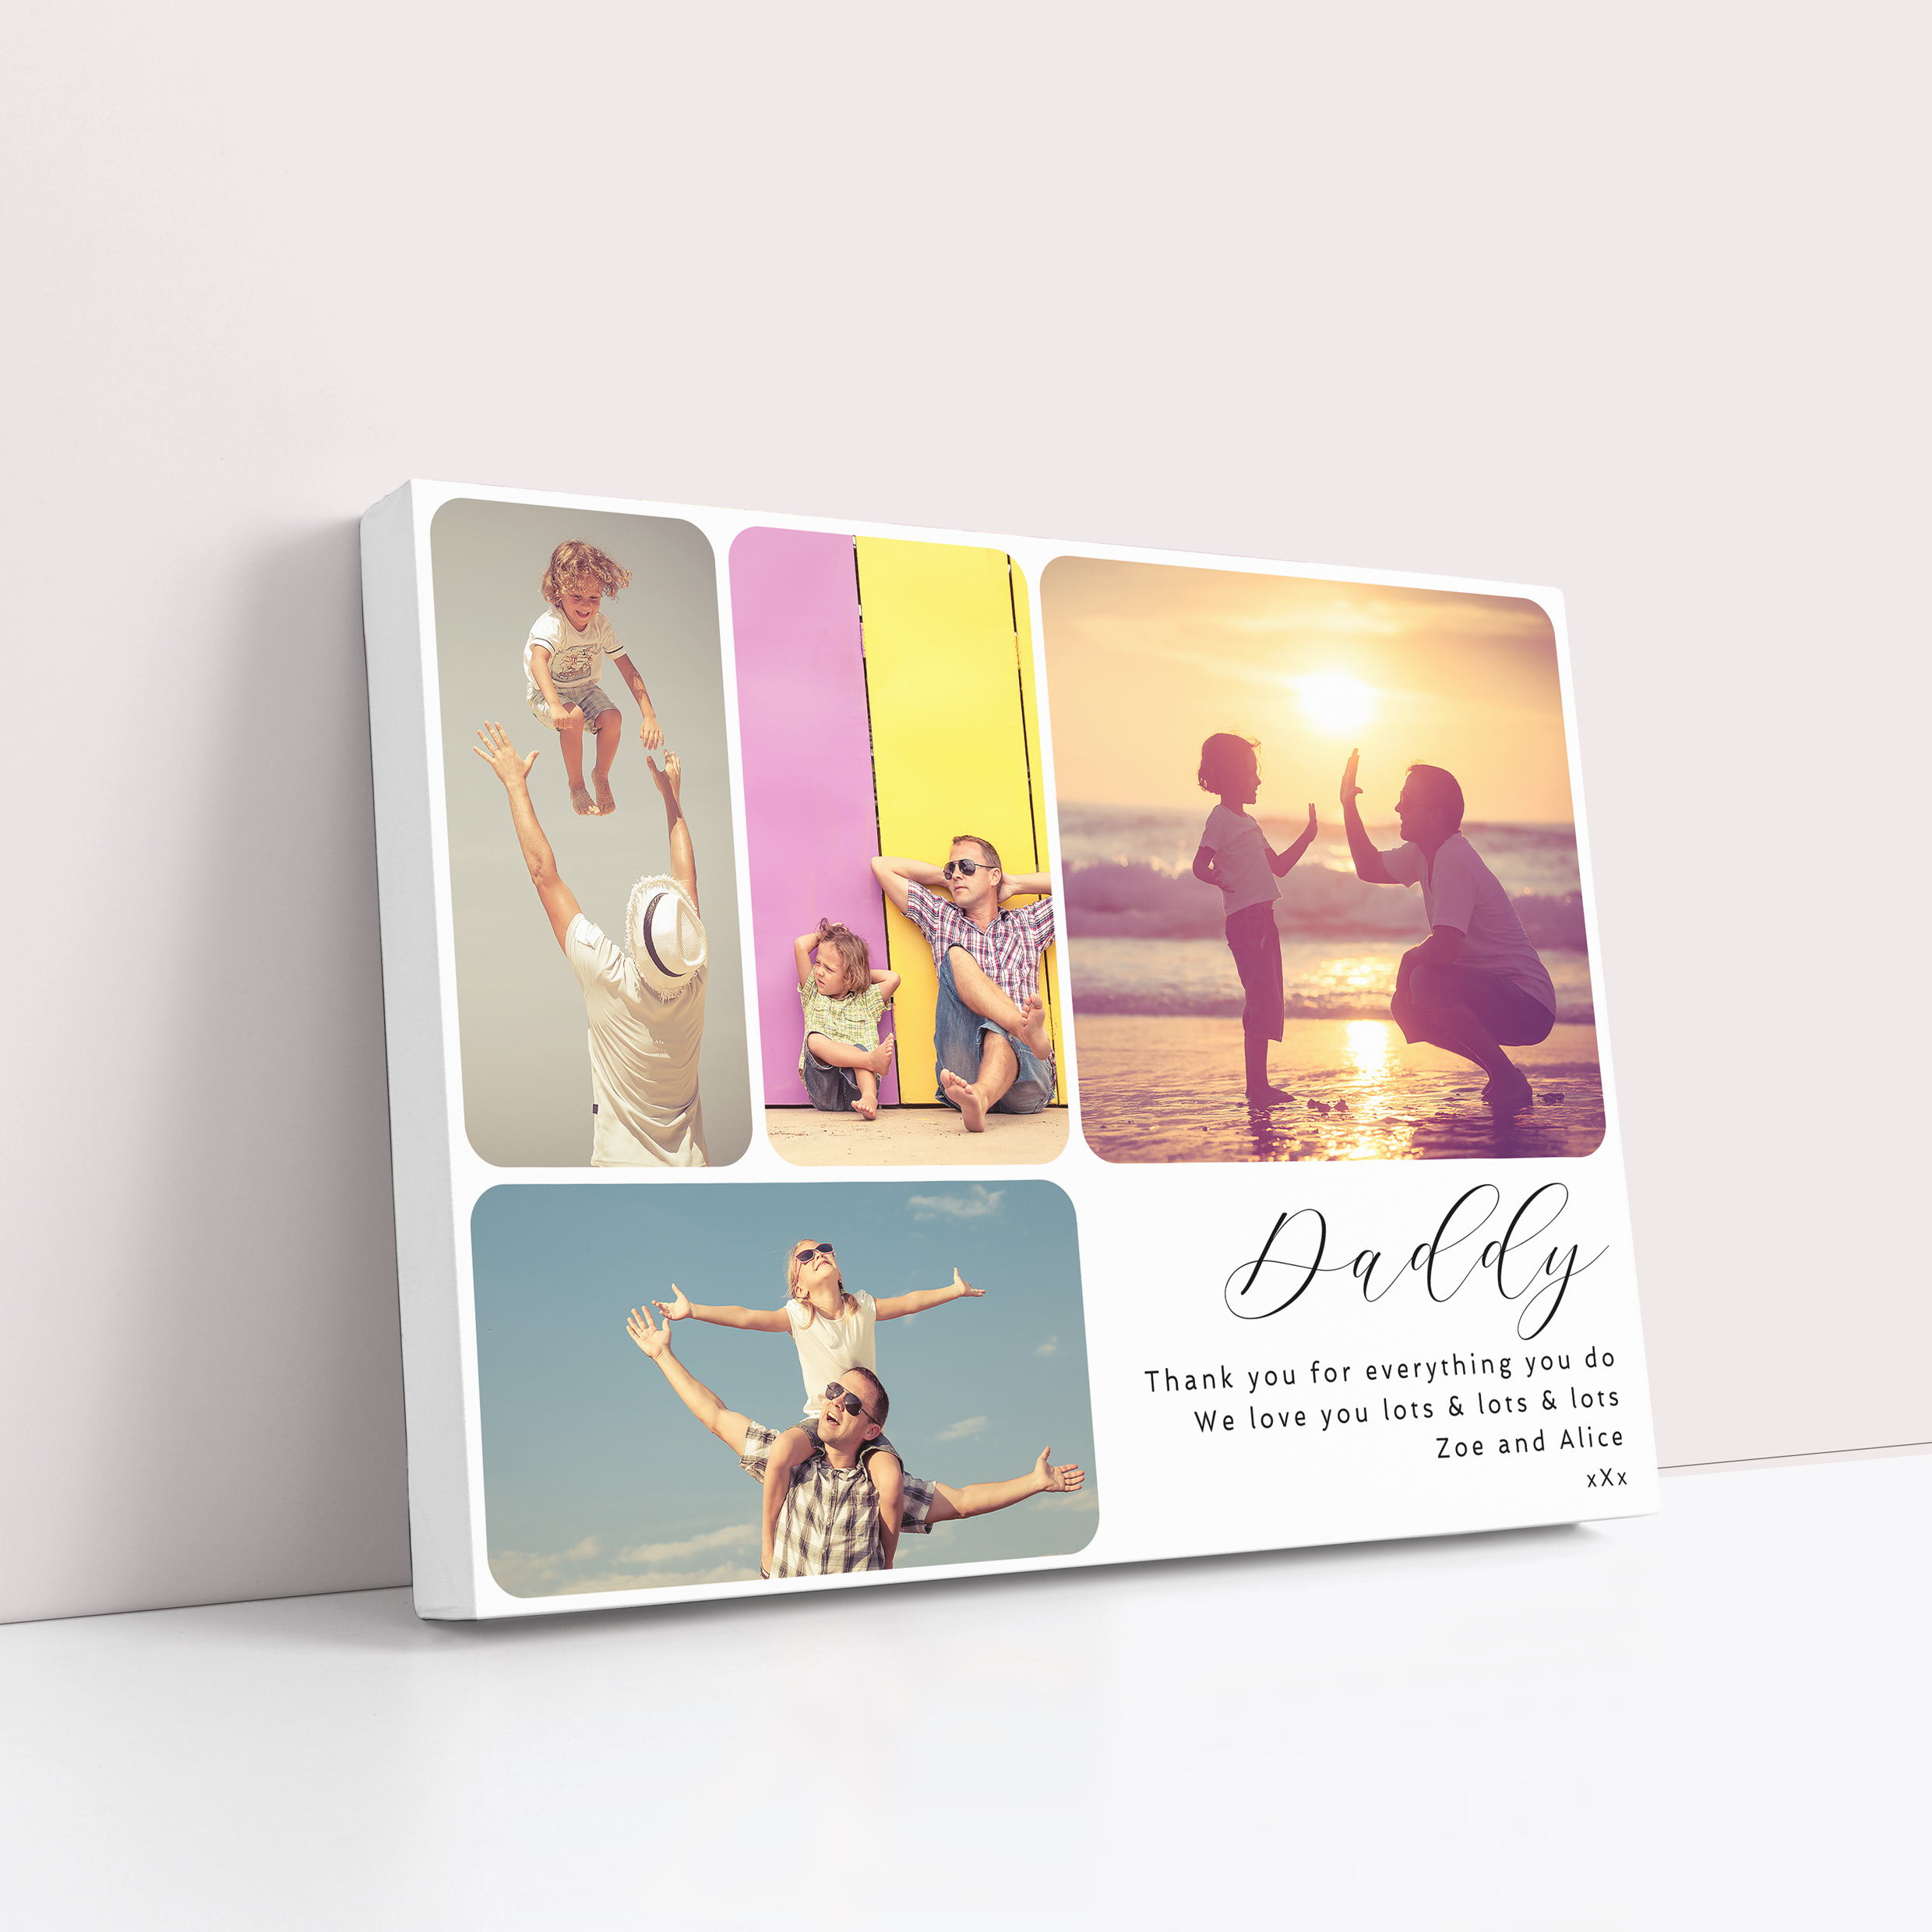 Dad's Collage Personalised Stretch Canvas Print - Capture the essence of your bond with four cherished photos